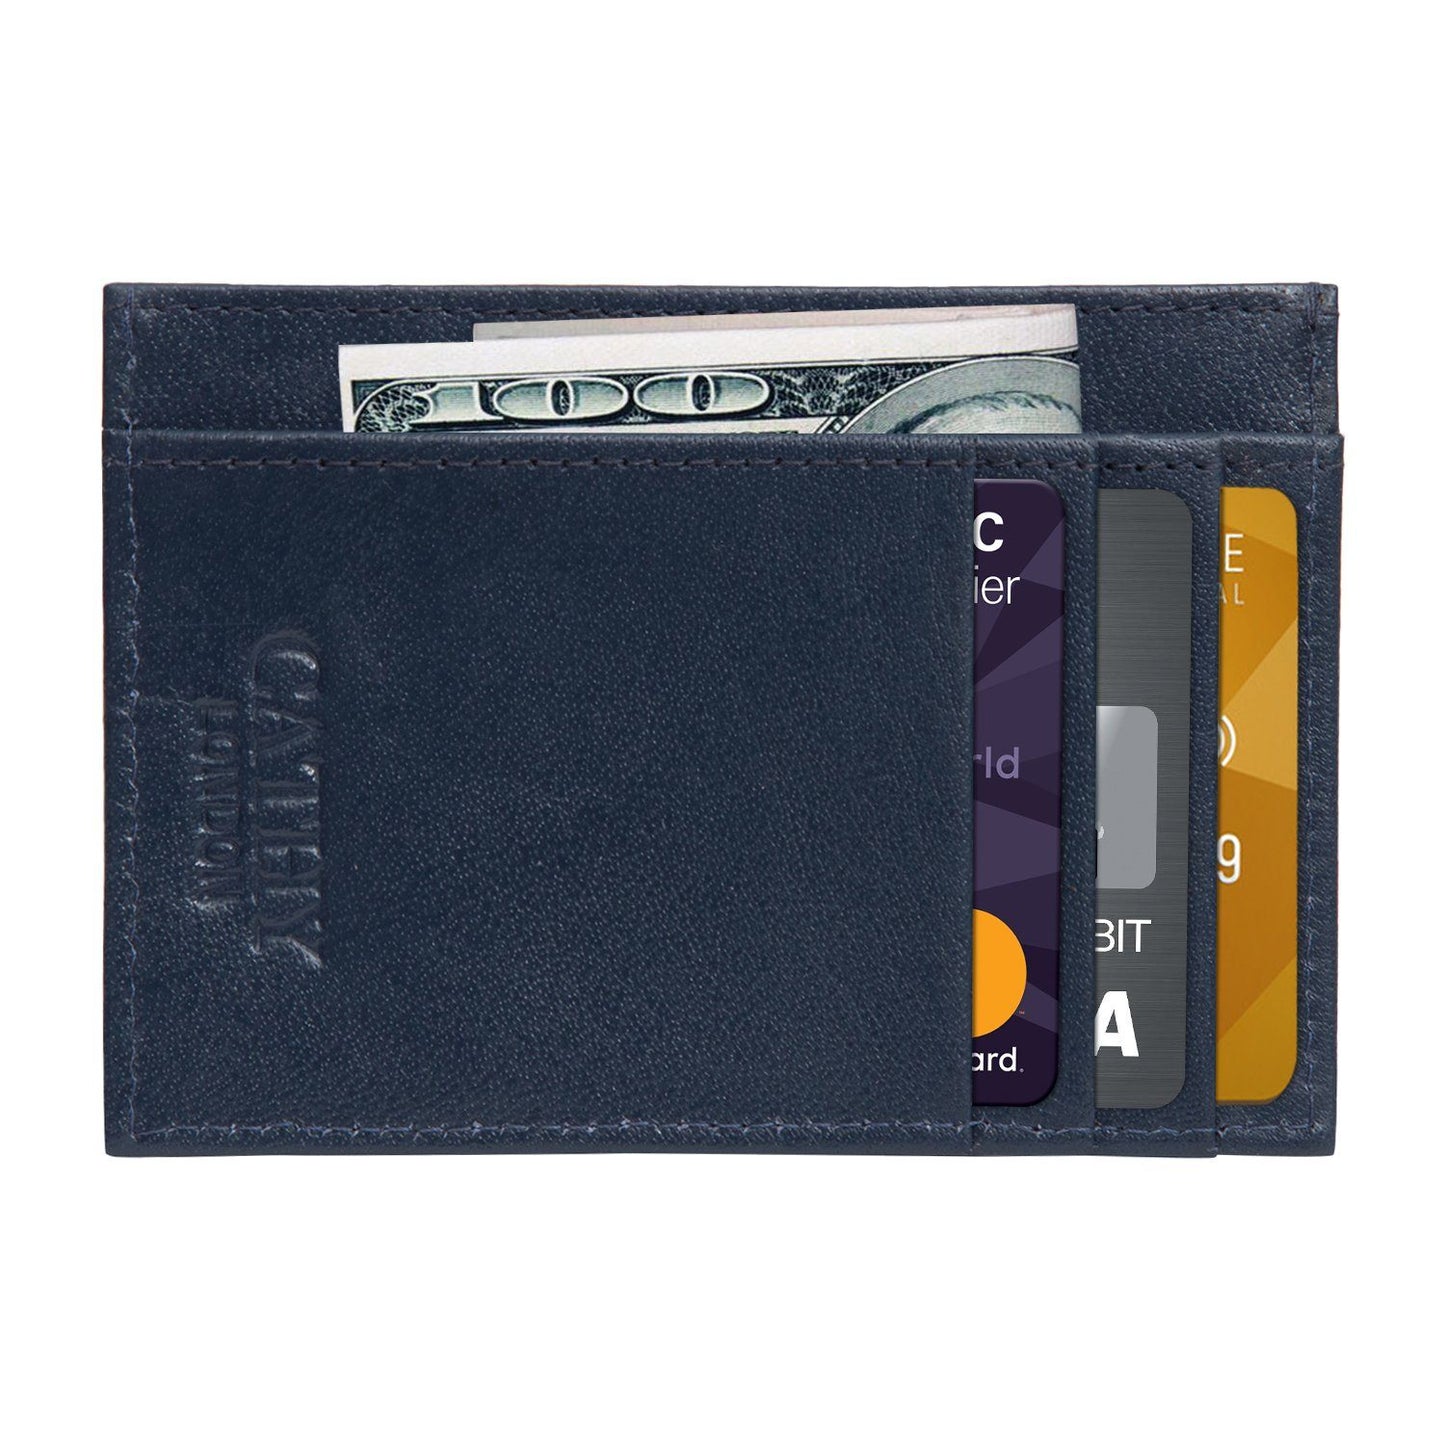 Blue Colour Italian Leather Card Holder/Slim Wallet (6 Card Slots + 1 ID Slot + Cash Compartment) Cathy London 